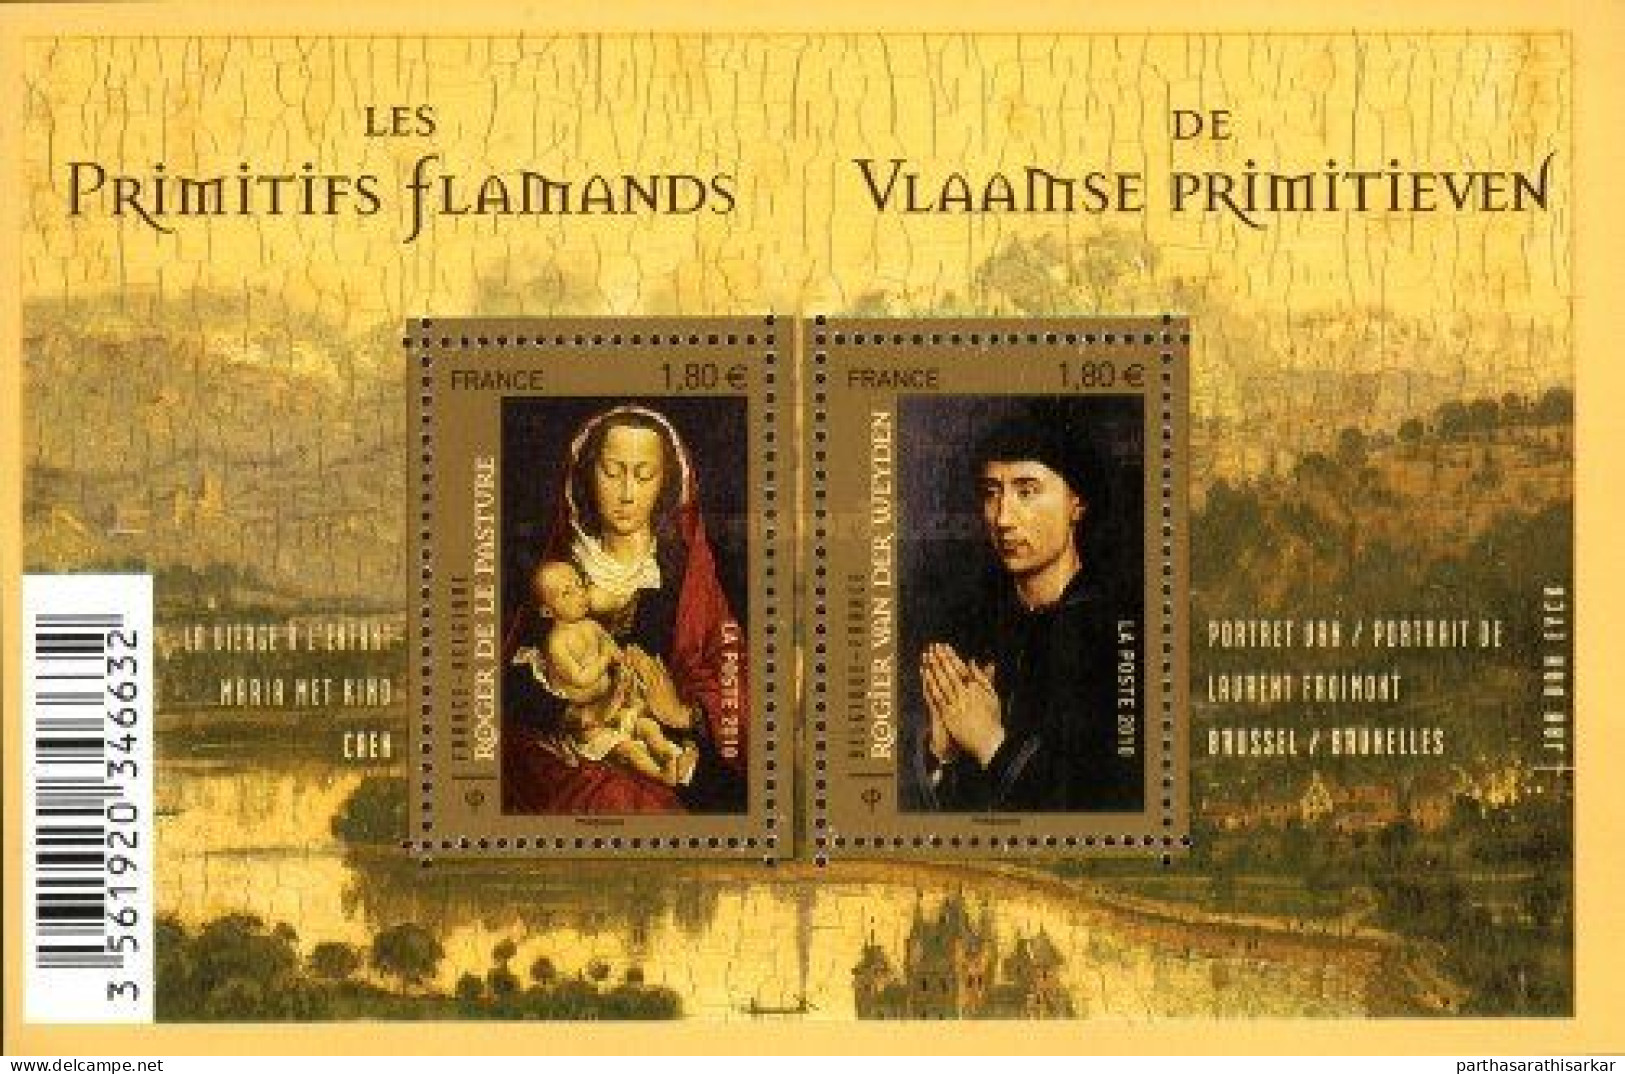 FRANCE 2010 JOINT ISSUE WITH BELGIUM EARLY NETHERLANDISH PAINTINGS MINIATURE SHEET MS MNH - Joint Issues